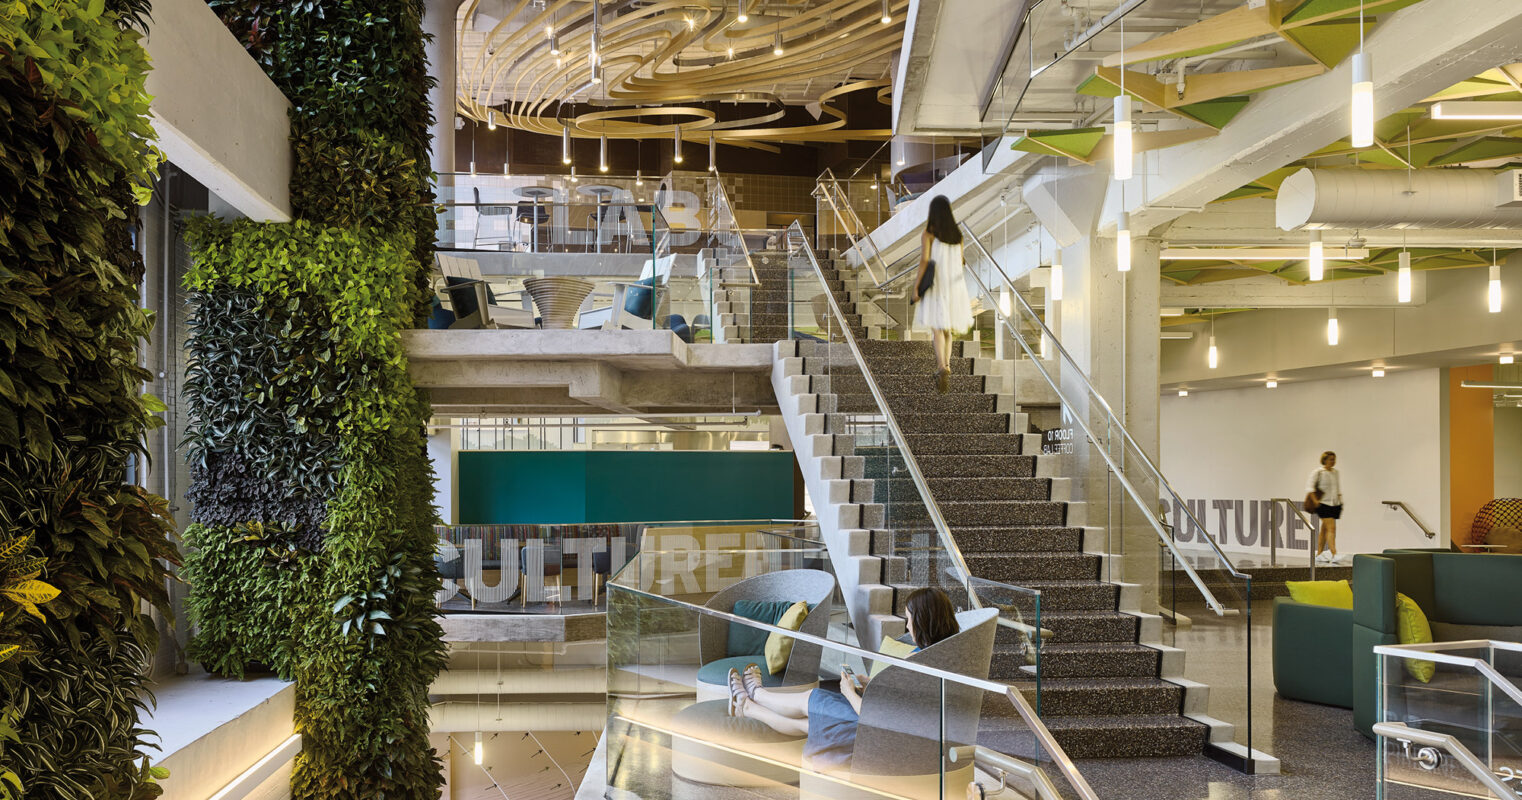 Modern office space with a blend of natural elements, featuring lush green living walls, open staircases, and contemporary design accents, emphasizing sustainability and innovation.